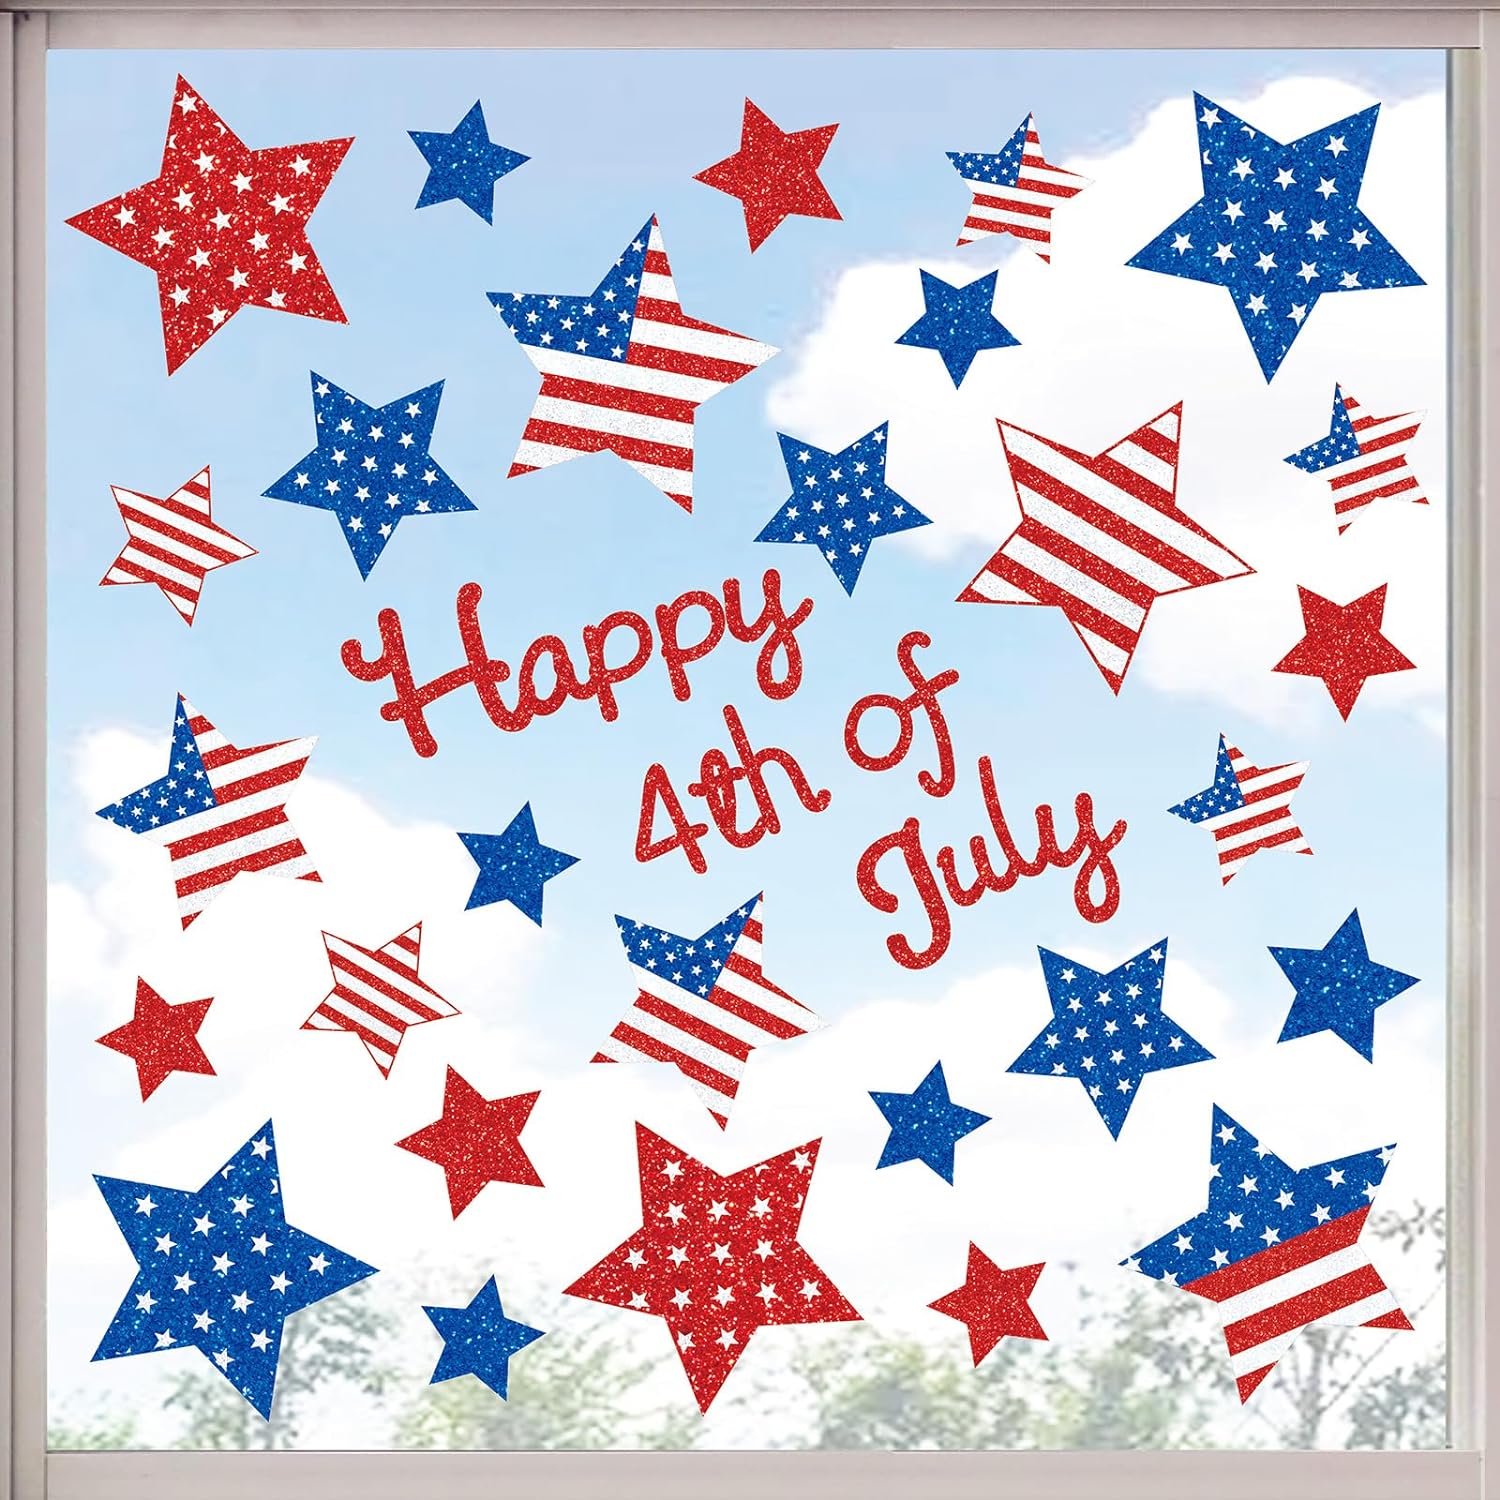 Whaline 4 Sheet Happy 4th of July Window Clings Patriotic American Flag Print Glitter Star Window Decals Double-Sided Red Blue Star Window Decor for Independence Day Home School